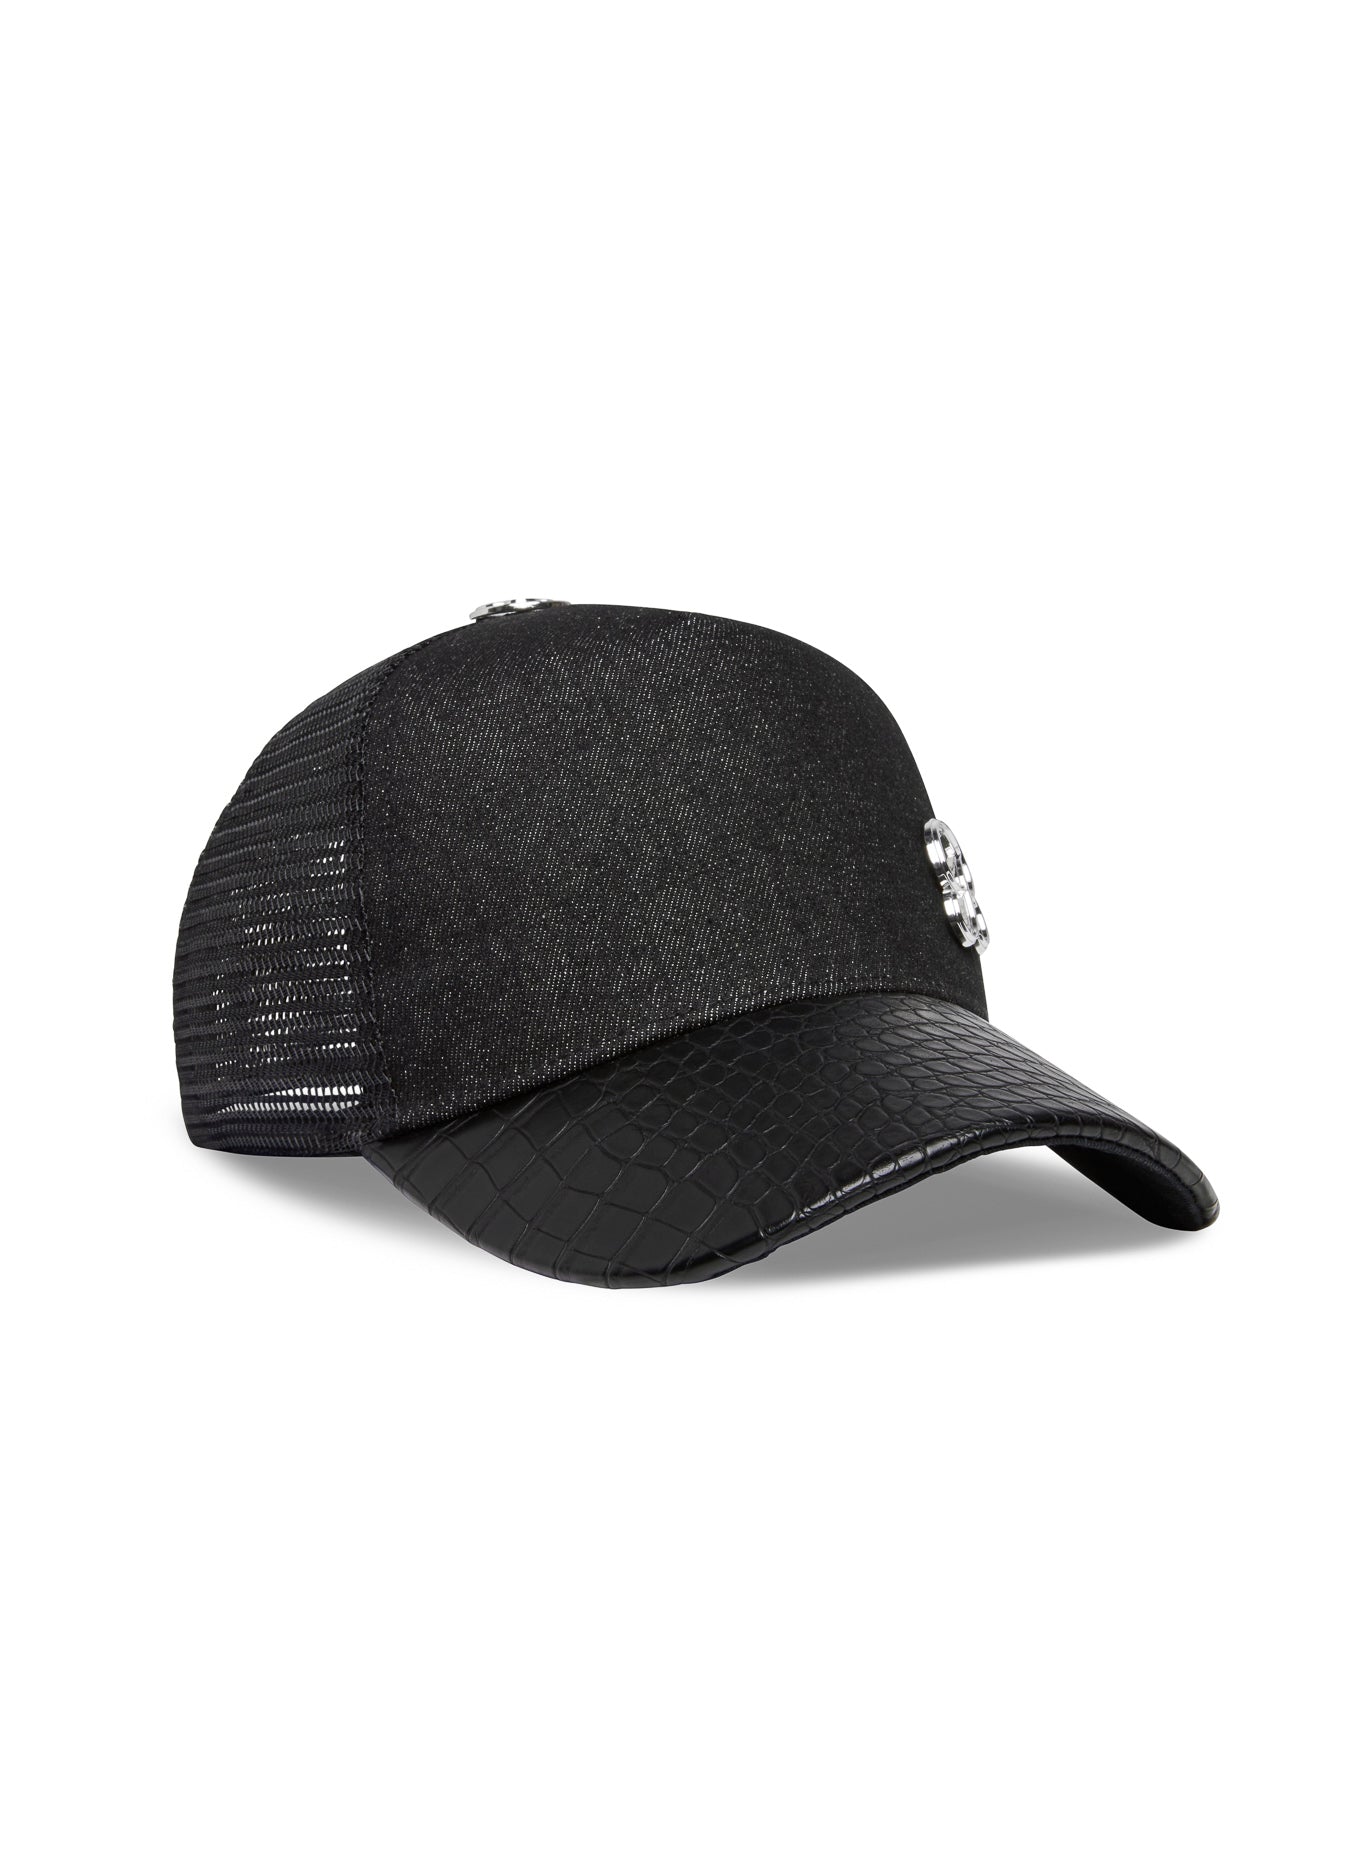 right side view of our black denim crocodile hat